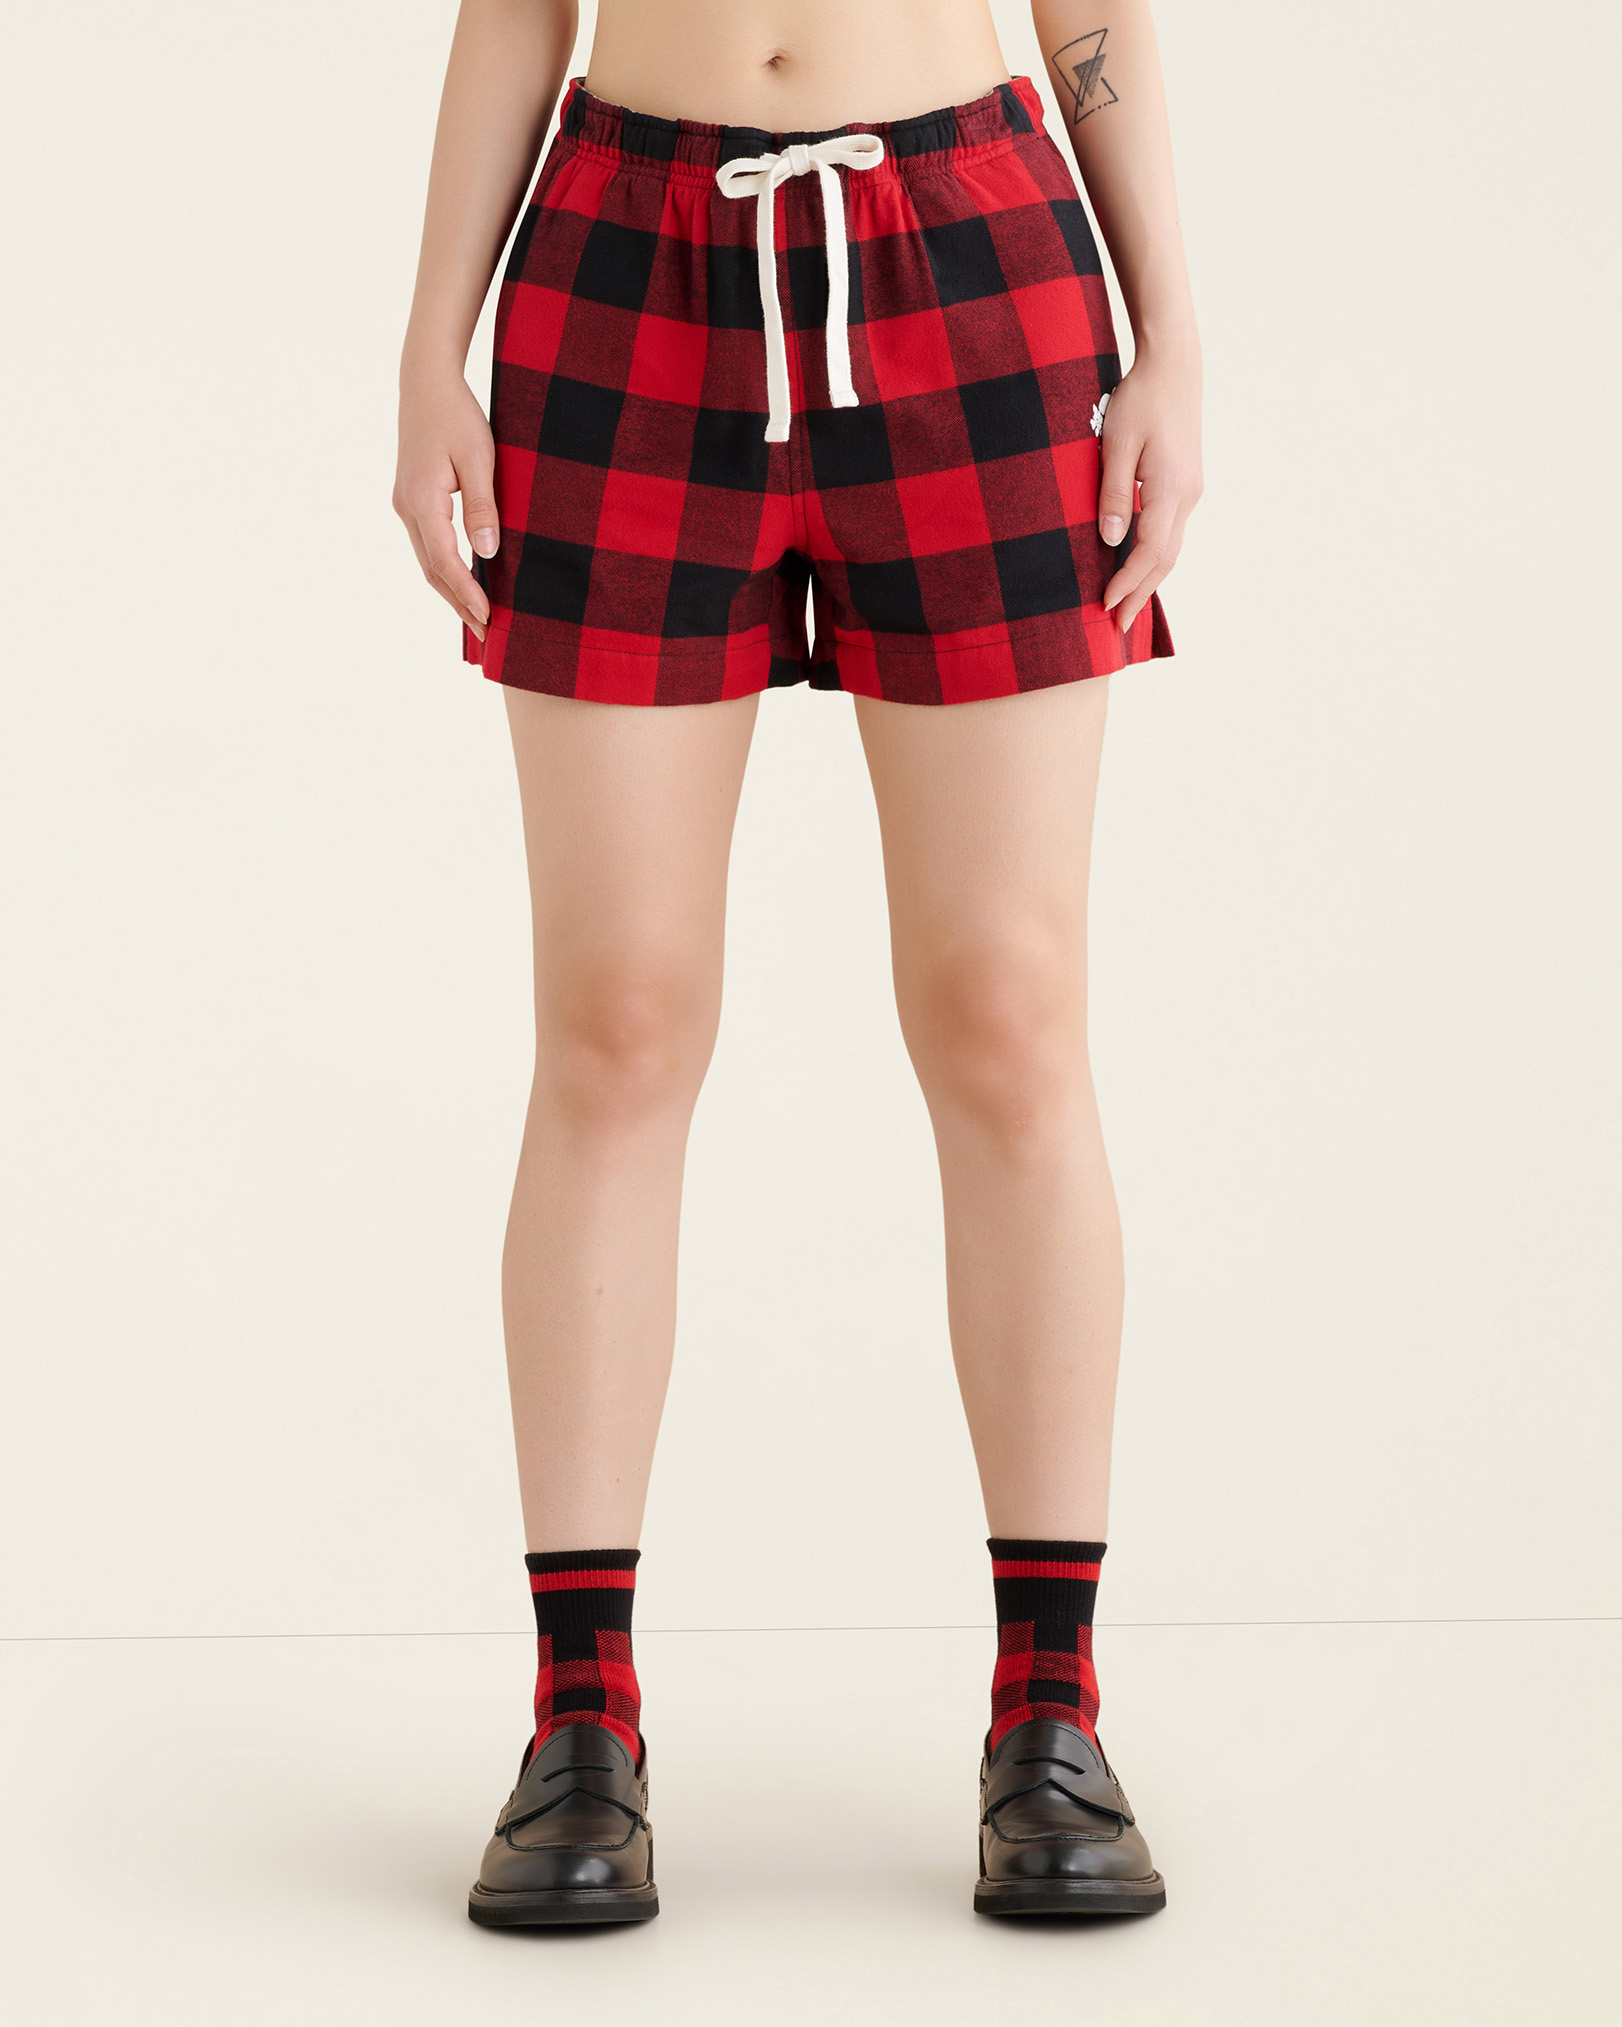 Roots Women's Park Plaid Pajama Short in Cabin Red